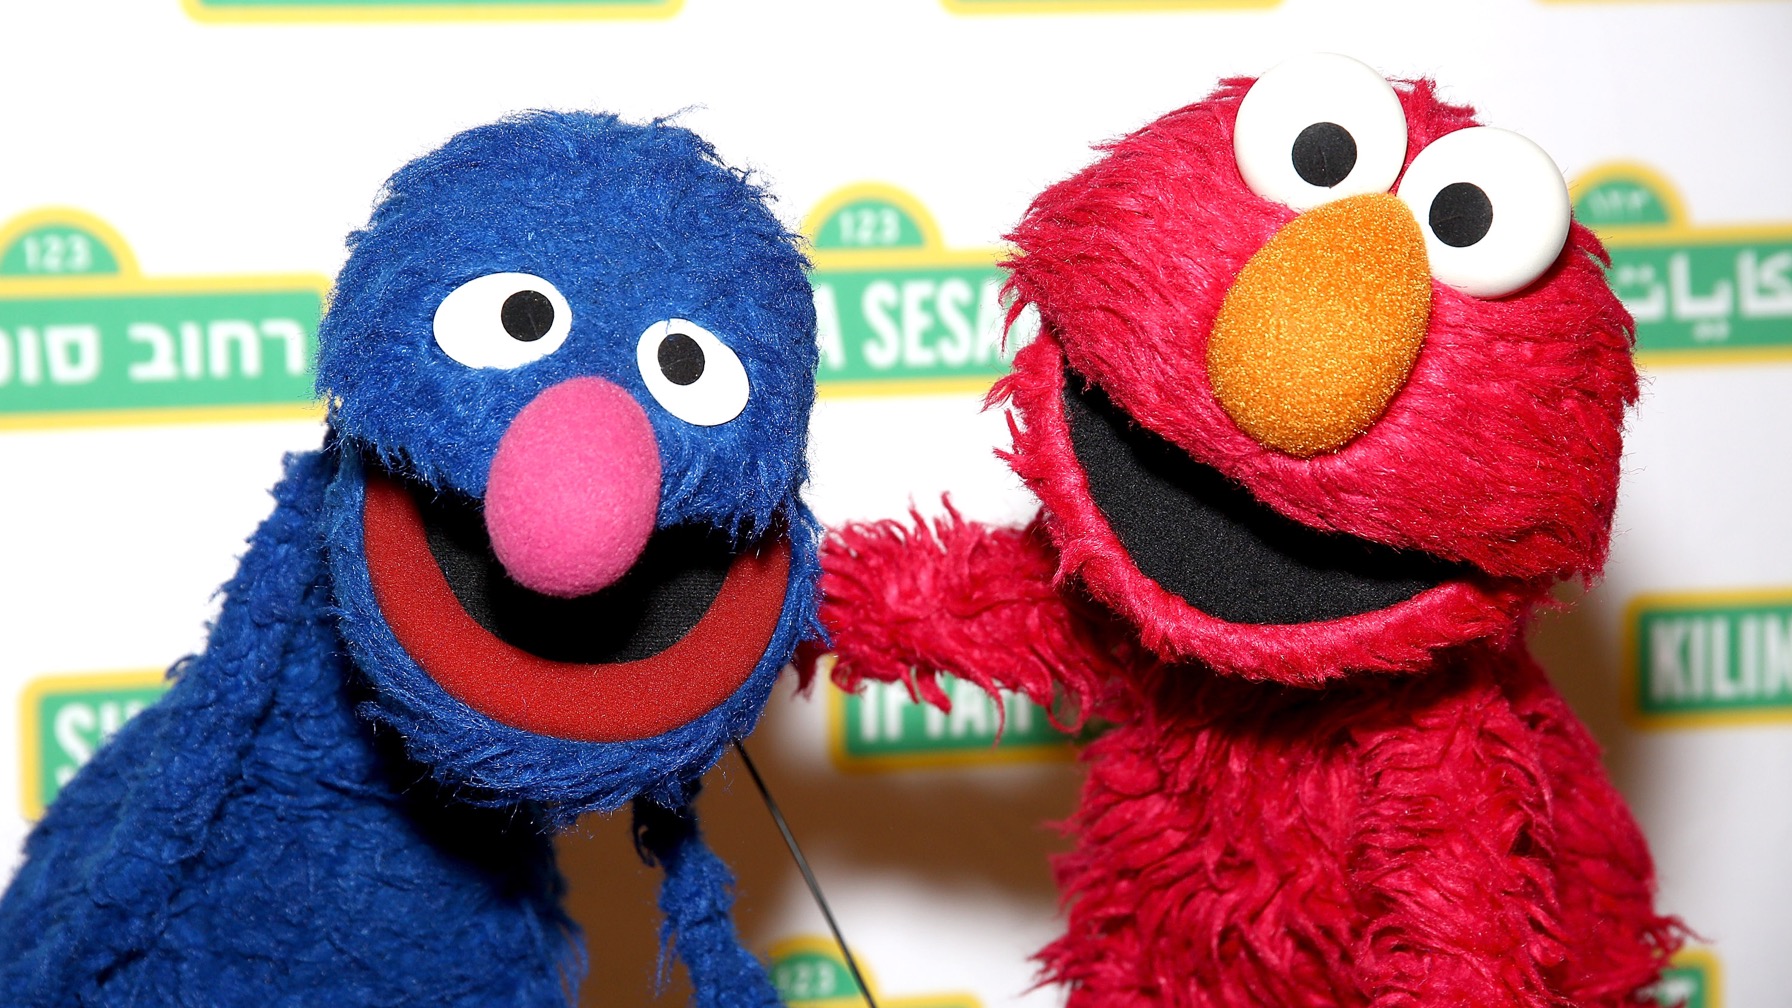 We're Pretty Sure Grover Just Dropped the F-Bomb on Sesame Street